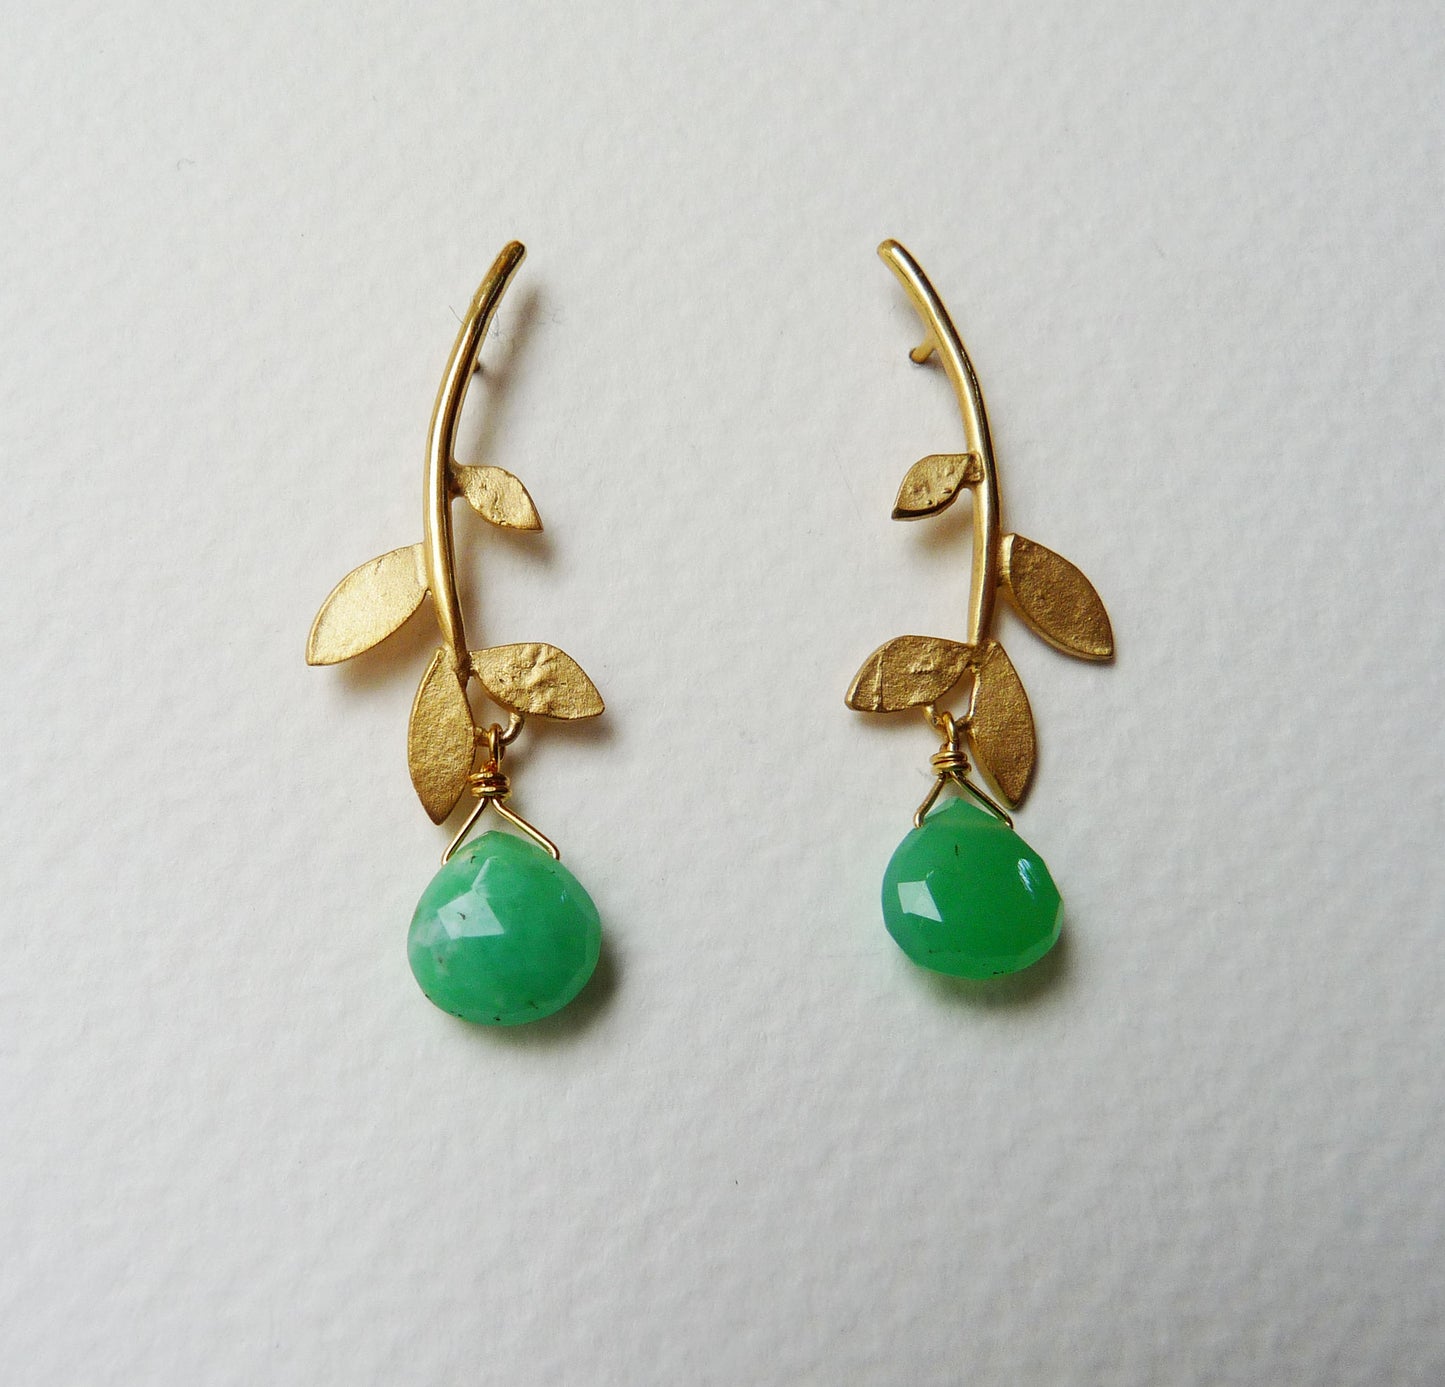 Blossoming, branch, jewellery, jewelry, earrings, studs, sterling, silver, 18ct, gold, nature, natural, amethyst, chrysoprase, labradorite